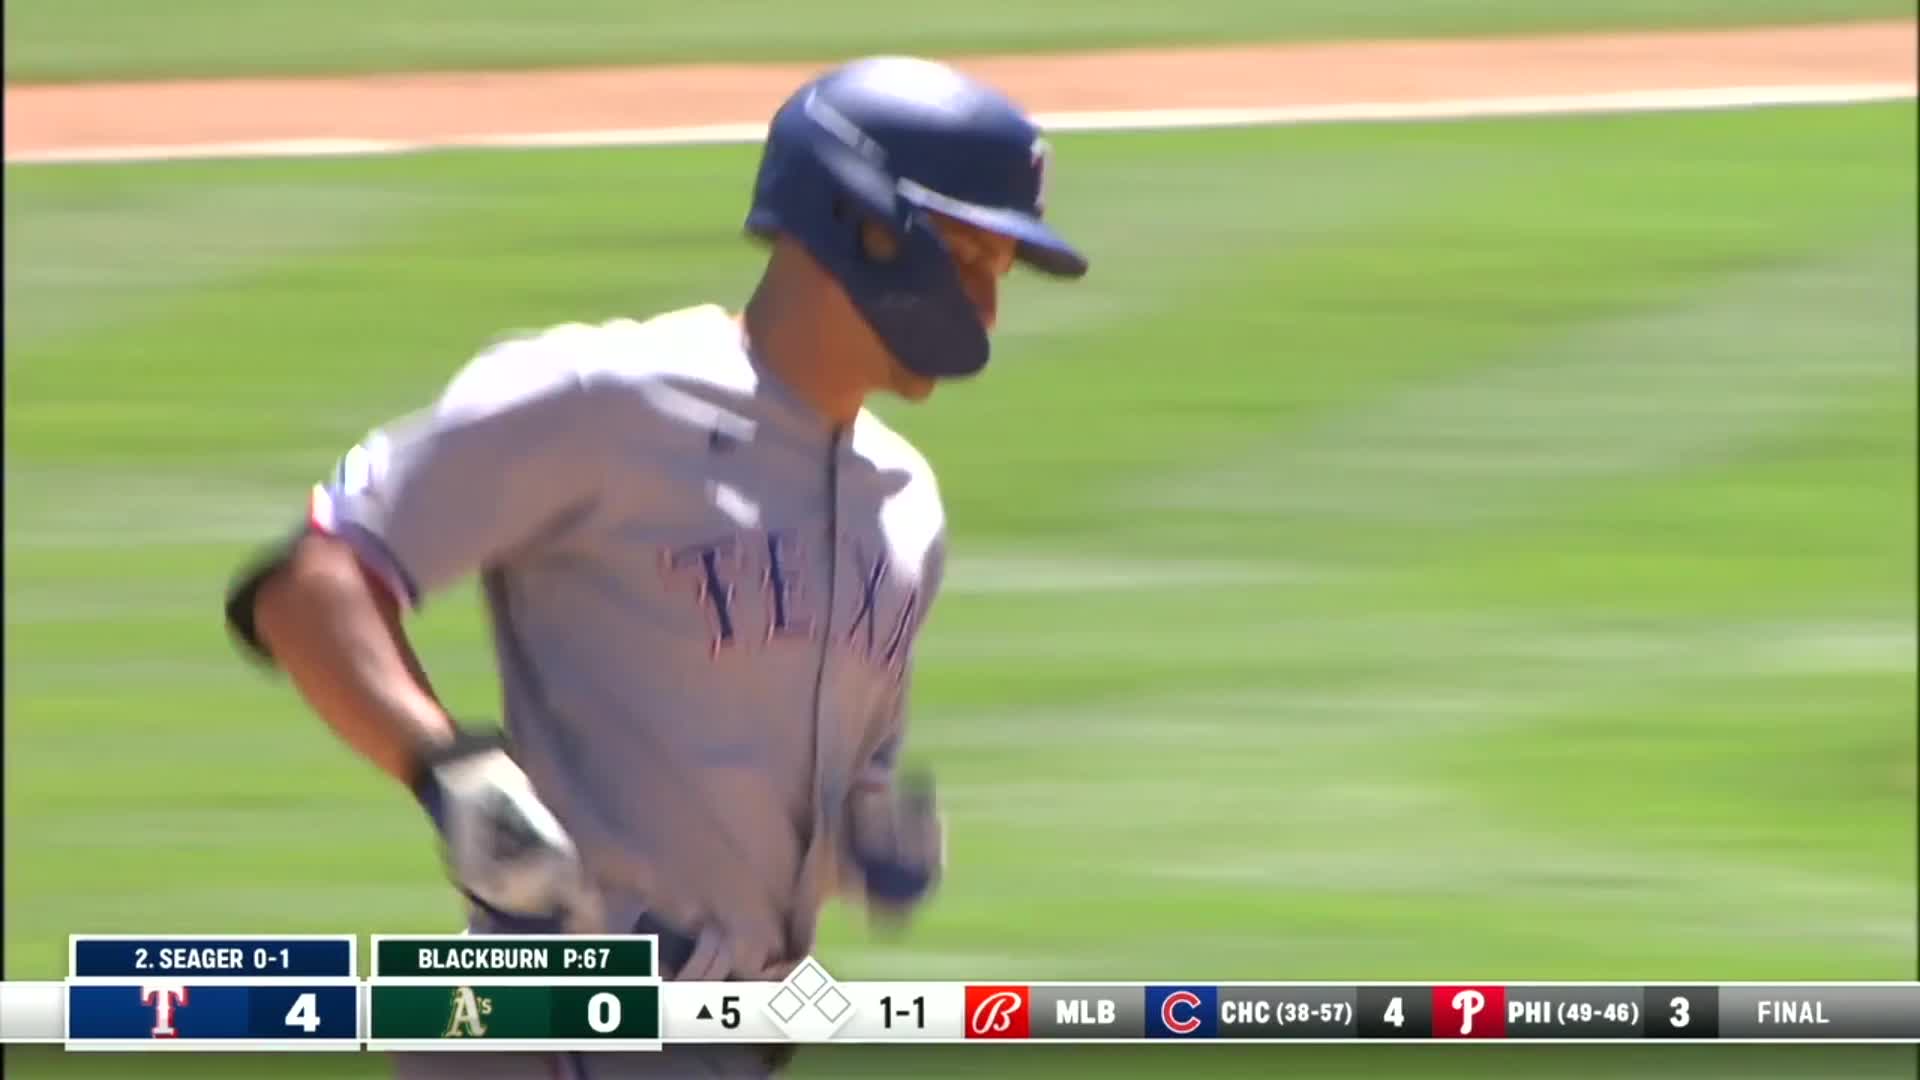 Cal Raleigh rounds the bases with his Big Dumper after hitting a solo shot  to make it 2-0 : r/baseball